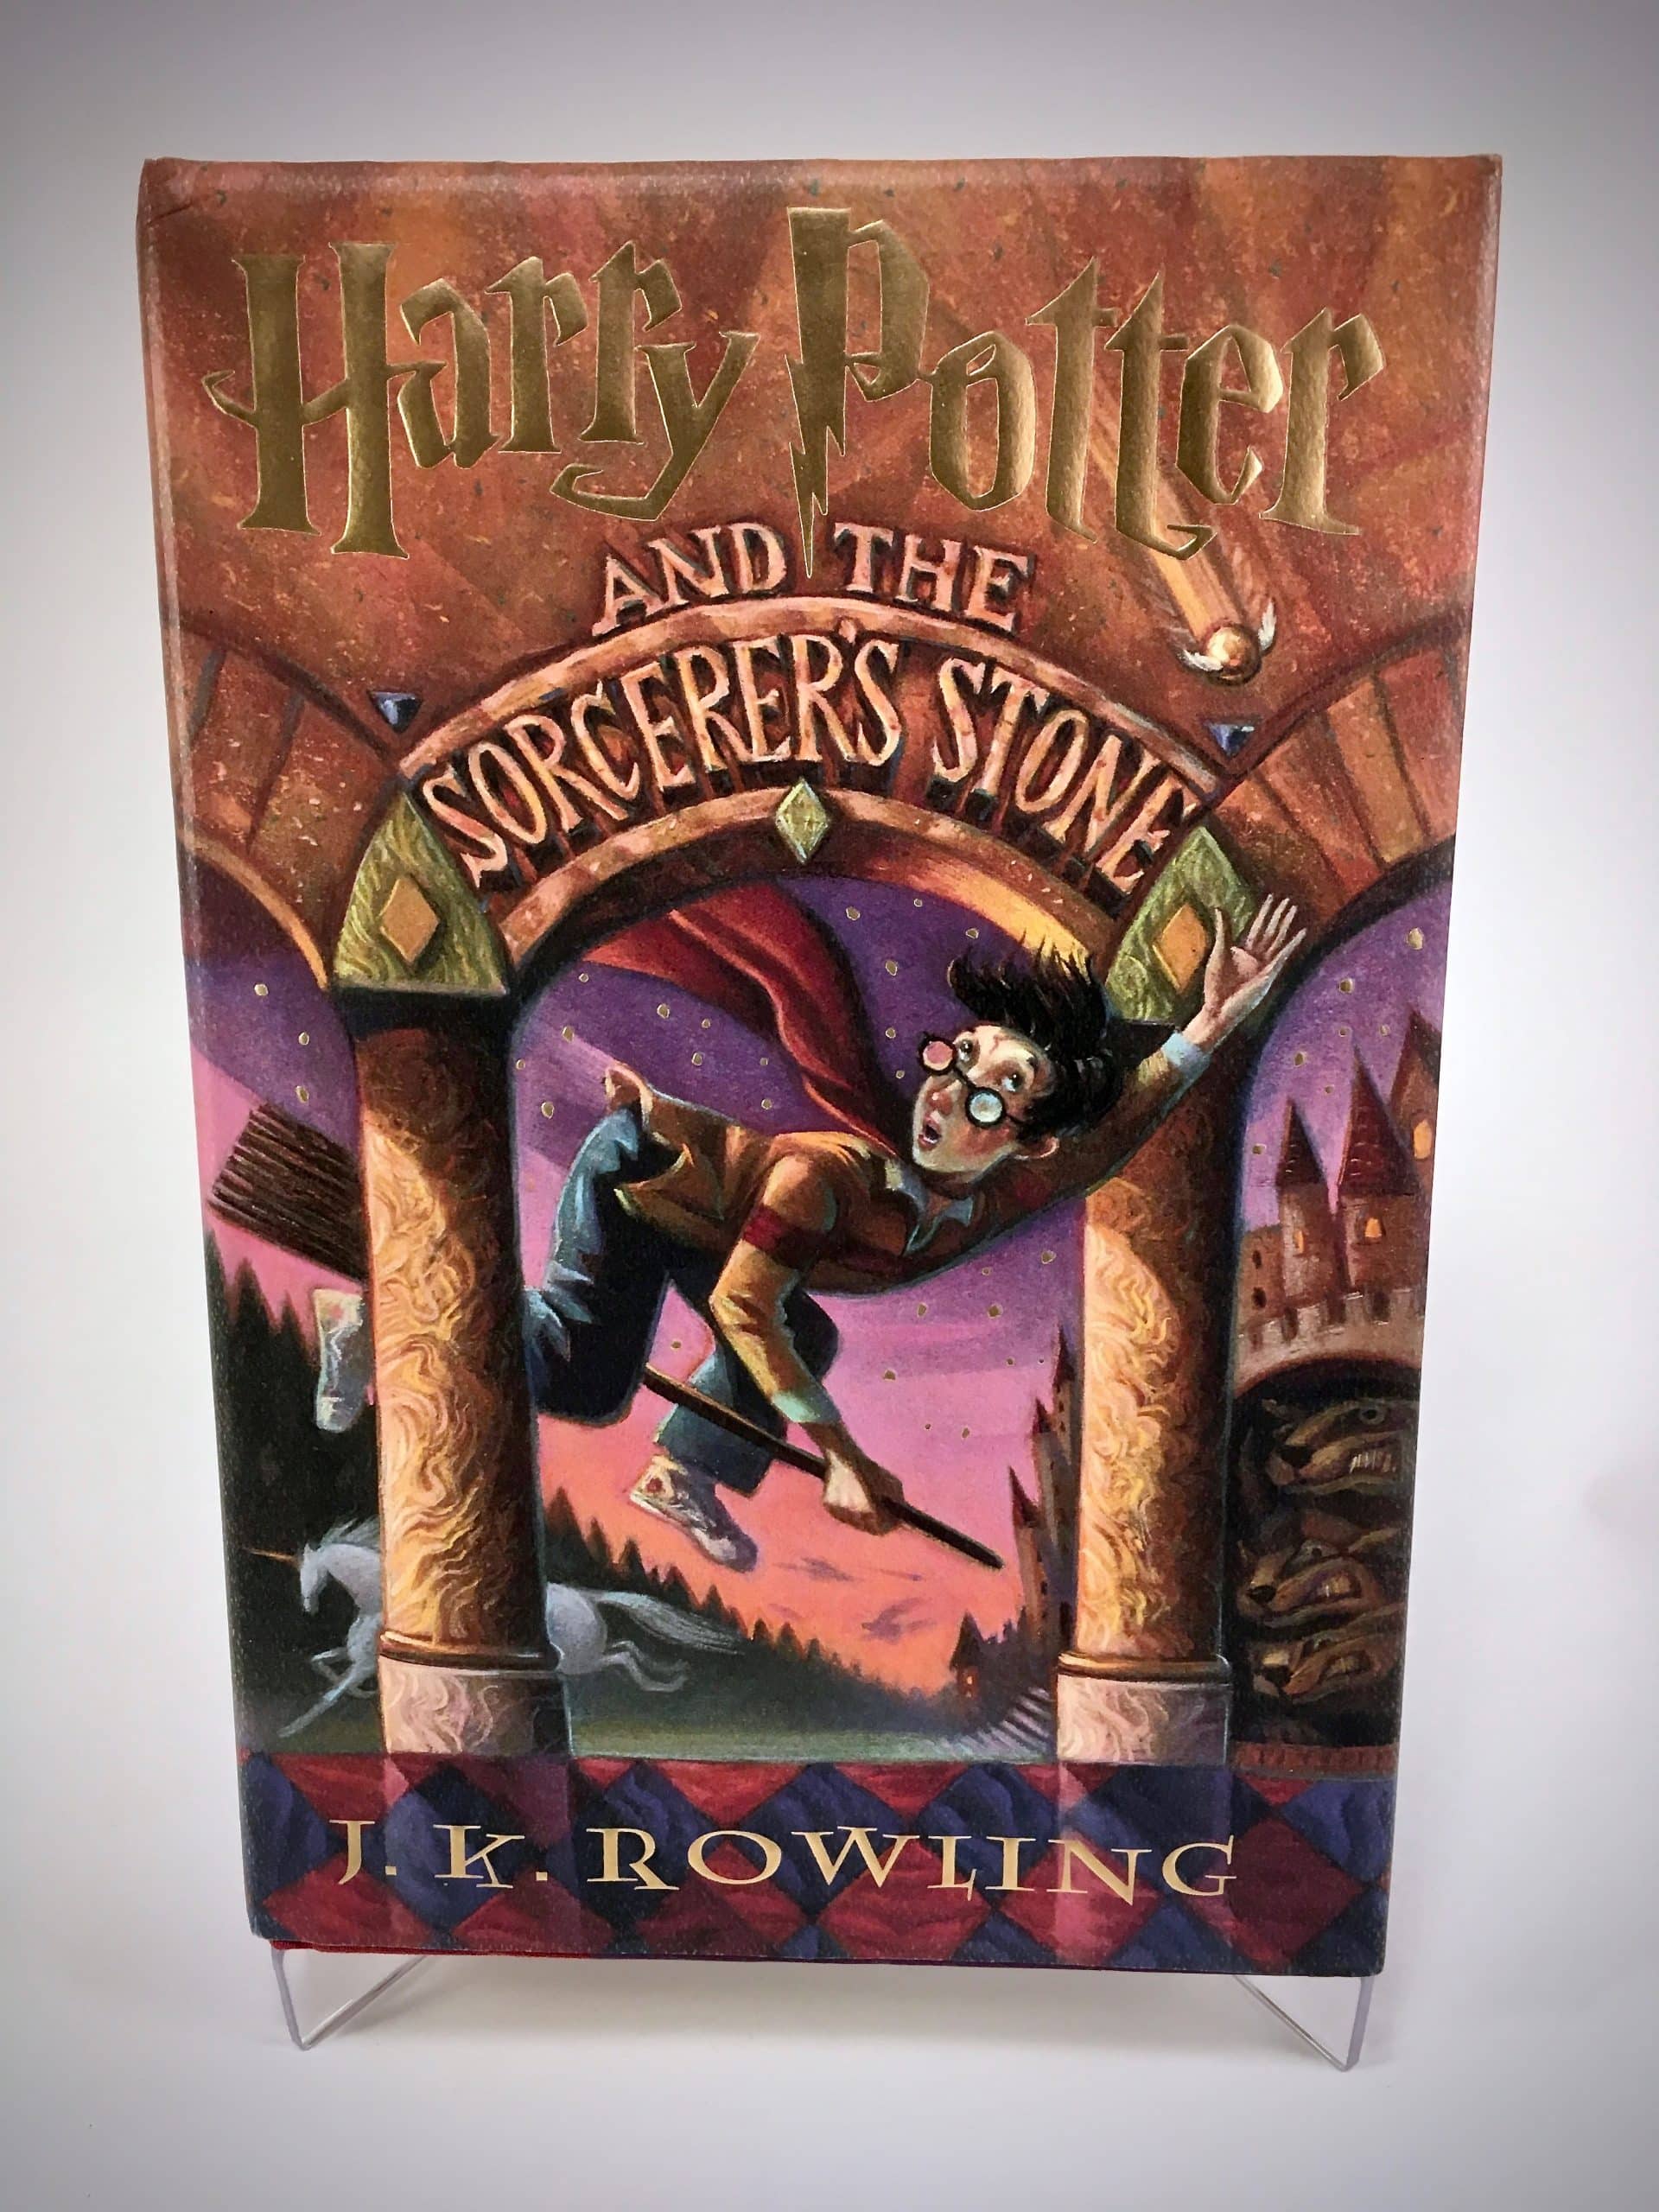 Recent Reads: Harry Potter and the Sorcerer